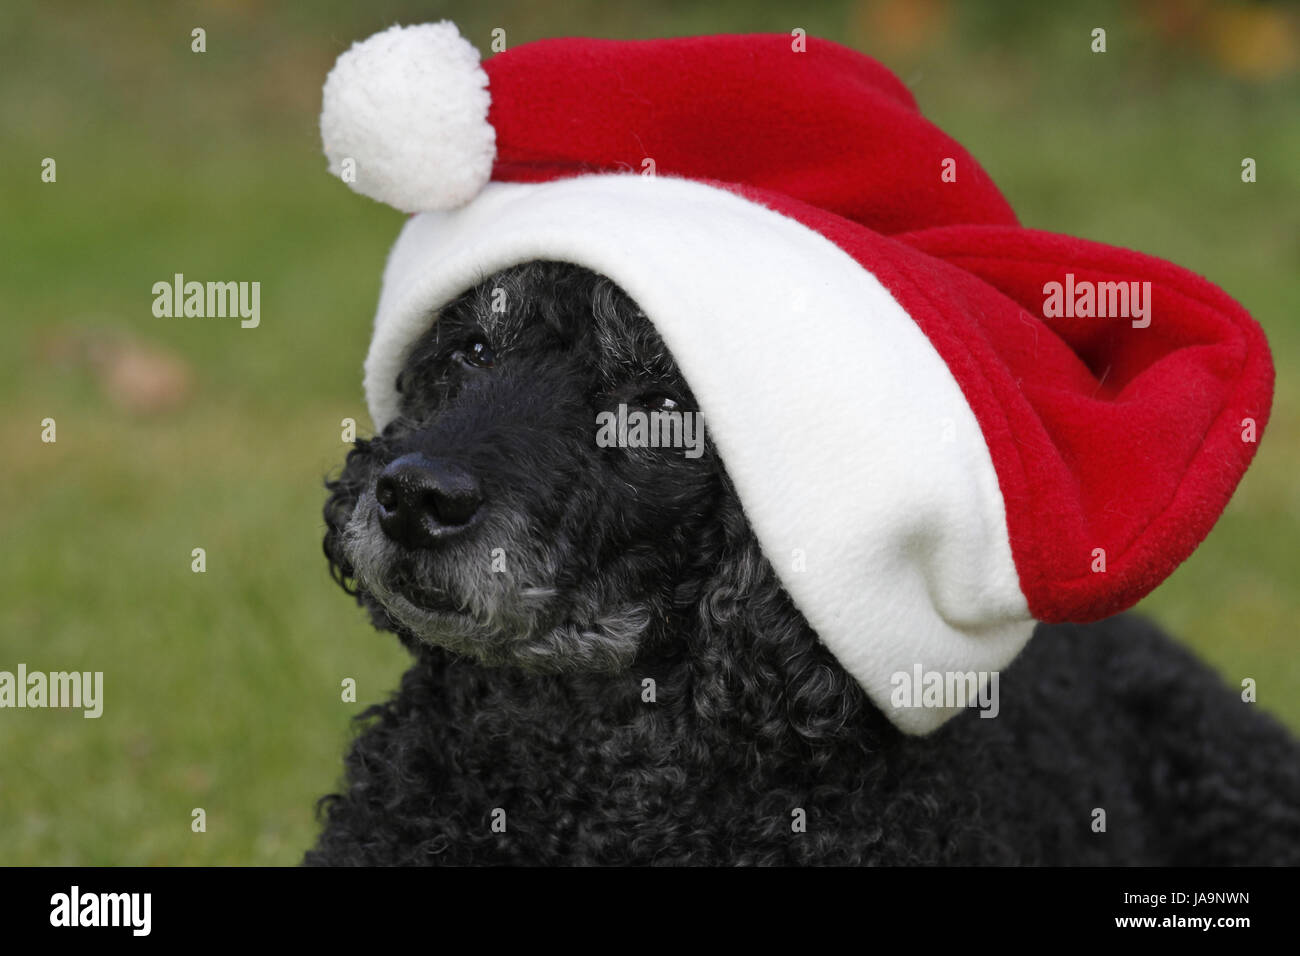 advent, witty, disguised, dog, poodle, cap, christmas, xmas, x-mas, advent, Stock Photo